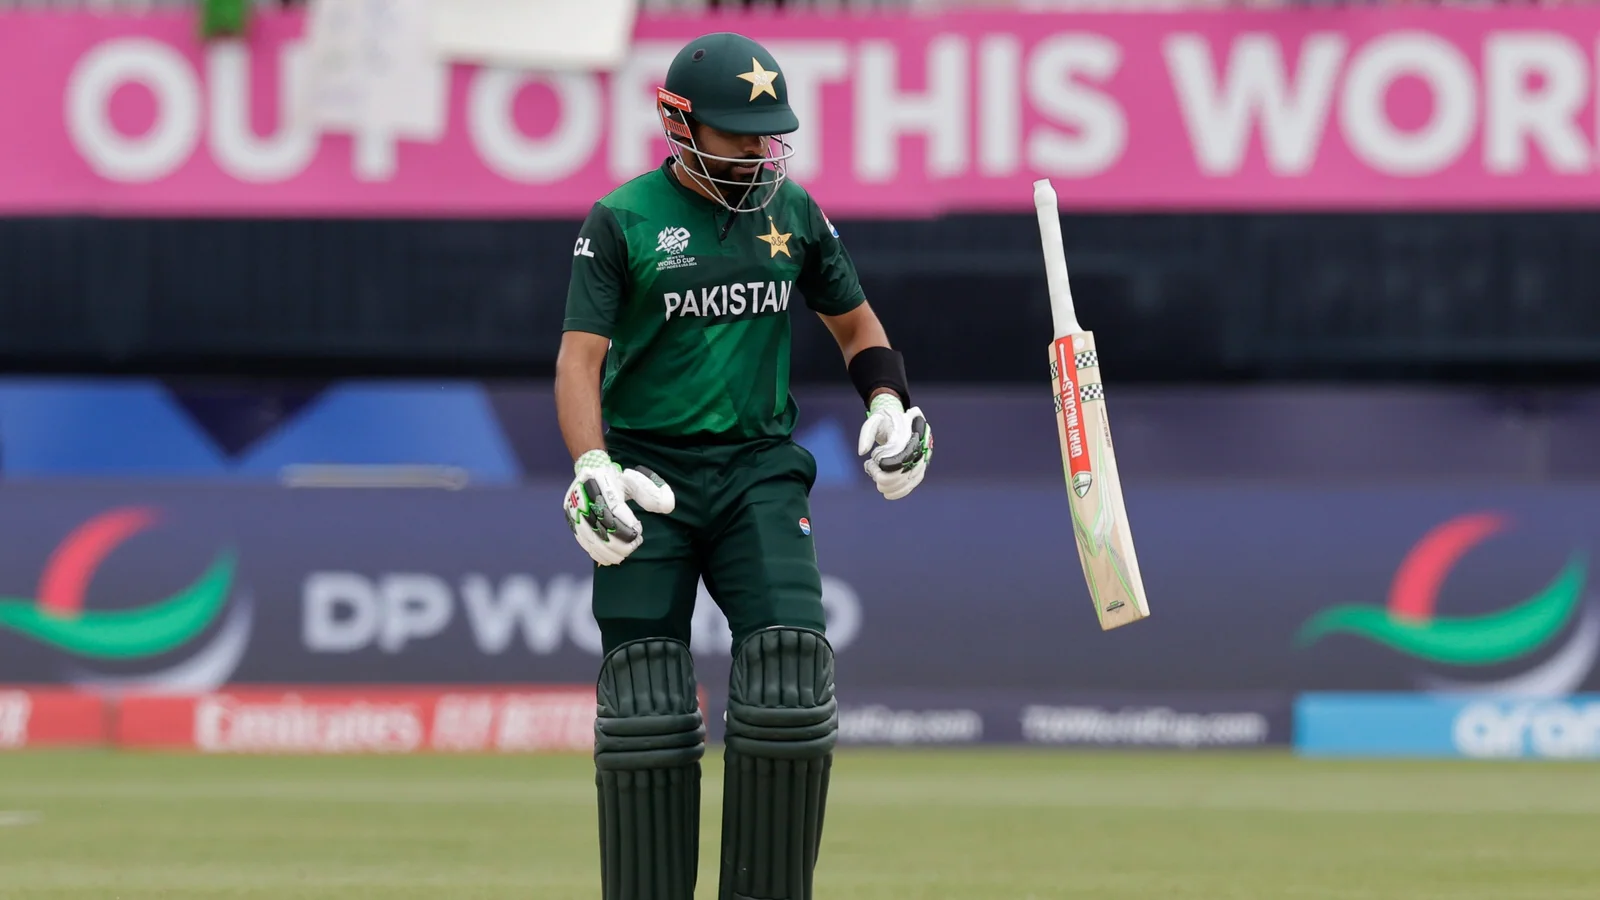 “You Kept Your Friends in the Team”: Ahmed Shahzad Fumes at Babar Azam Over ‘Legal Action’ Threat by the Pakistan Captain